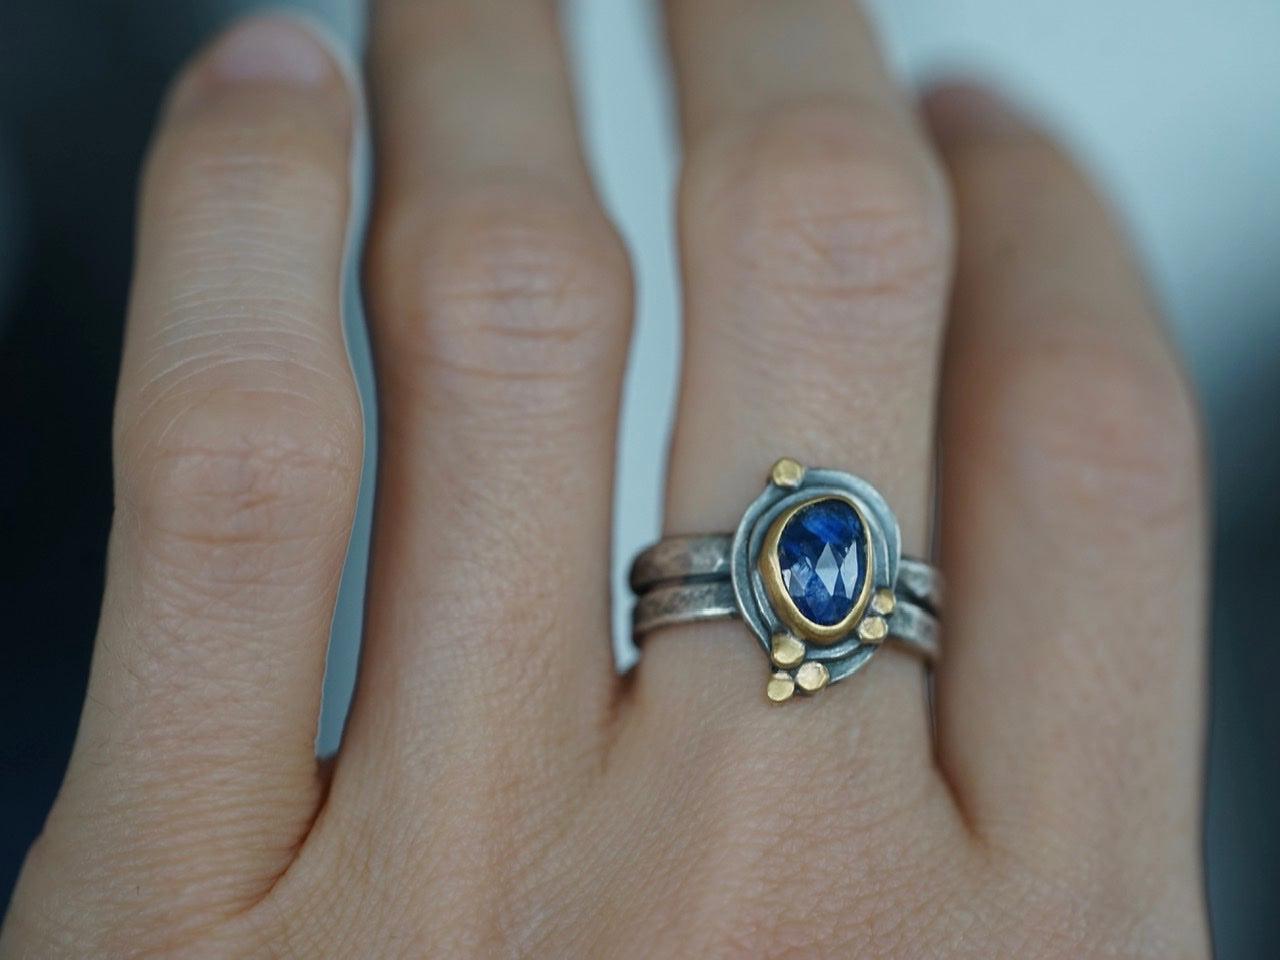 Royal blue sapphire ring size 7